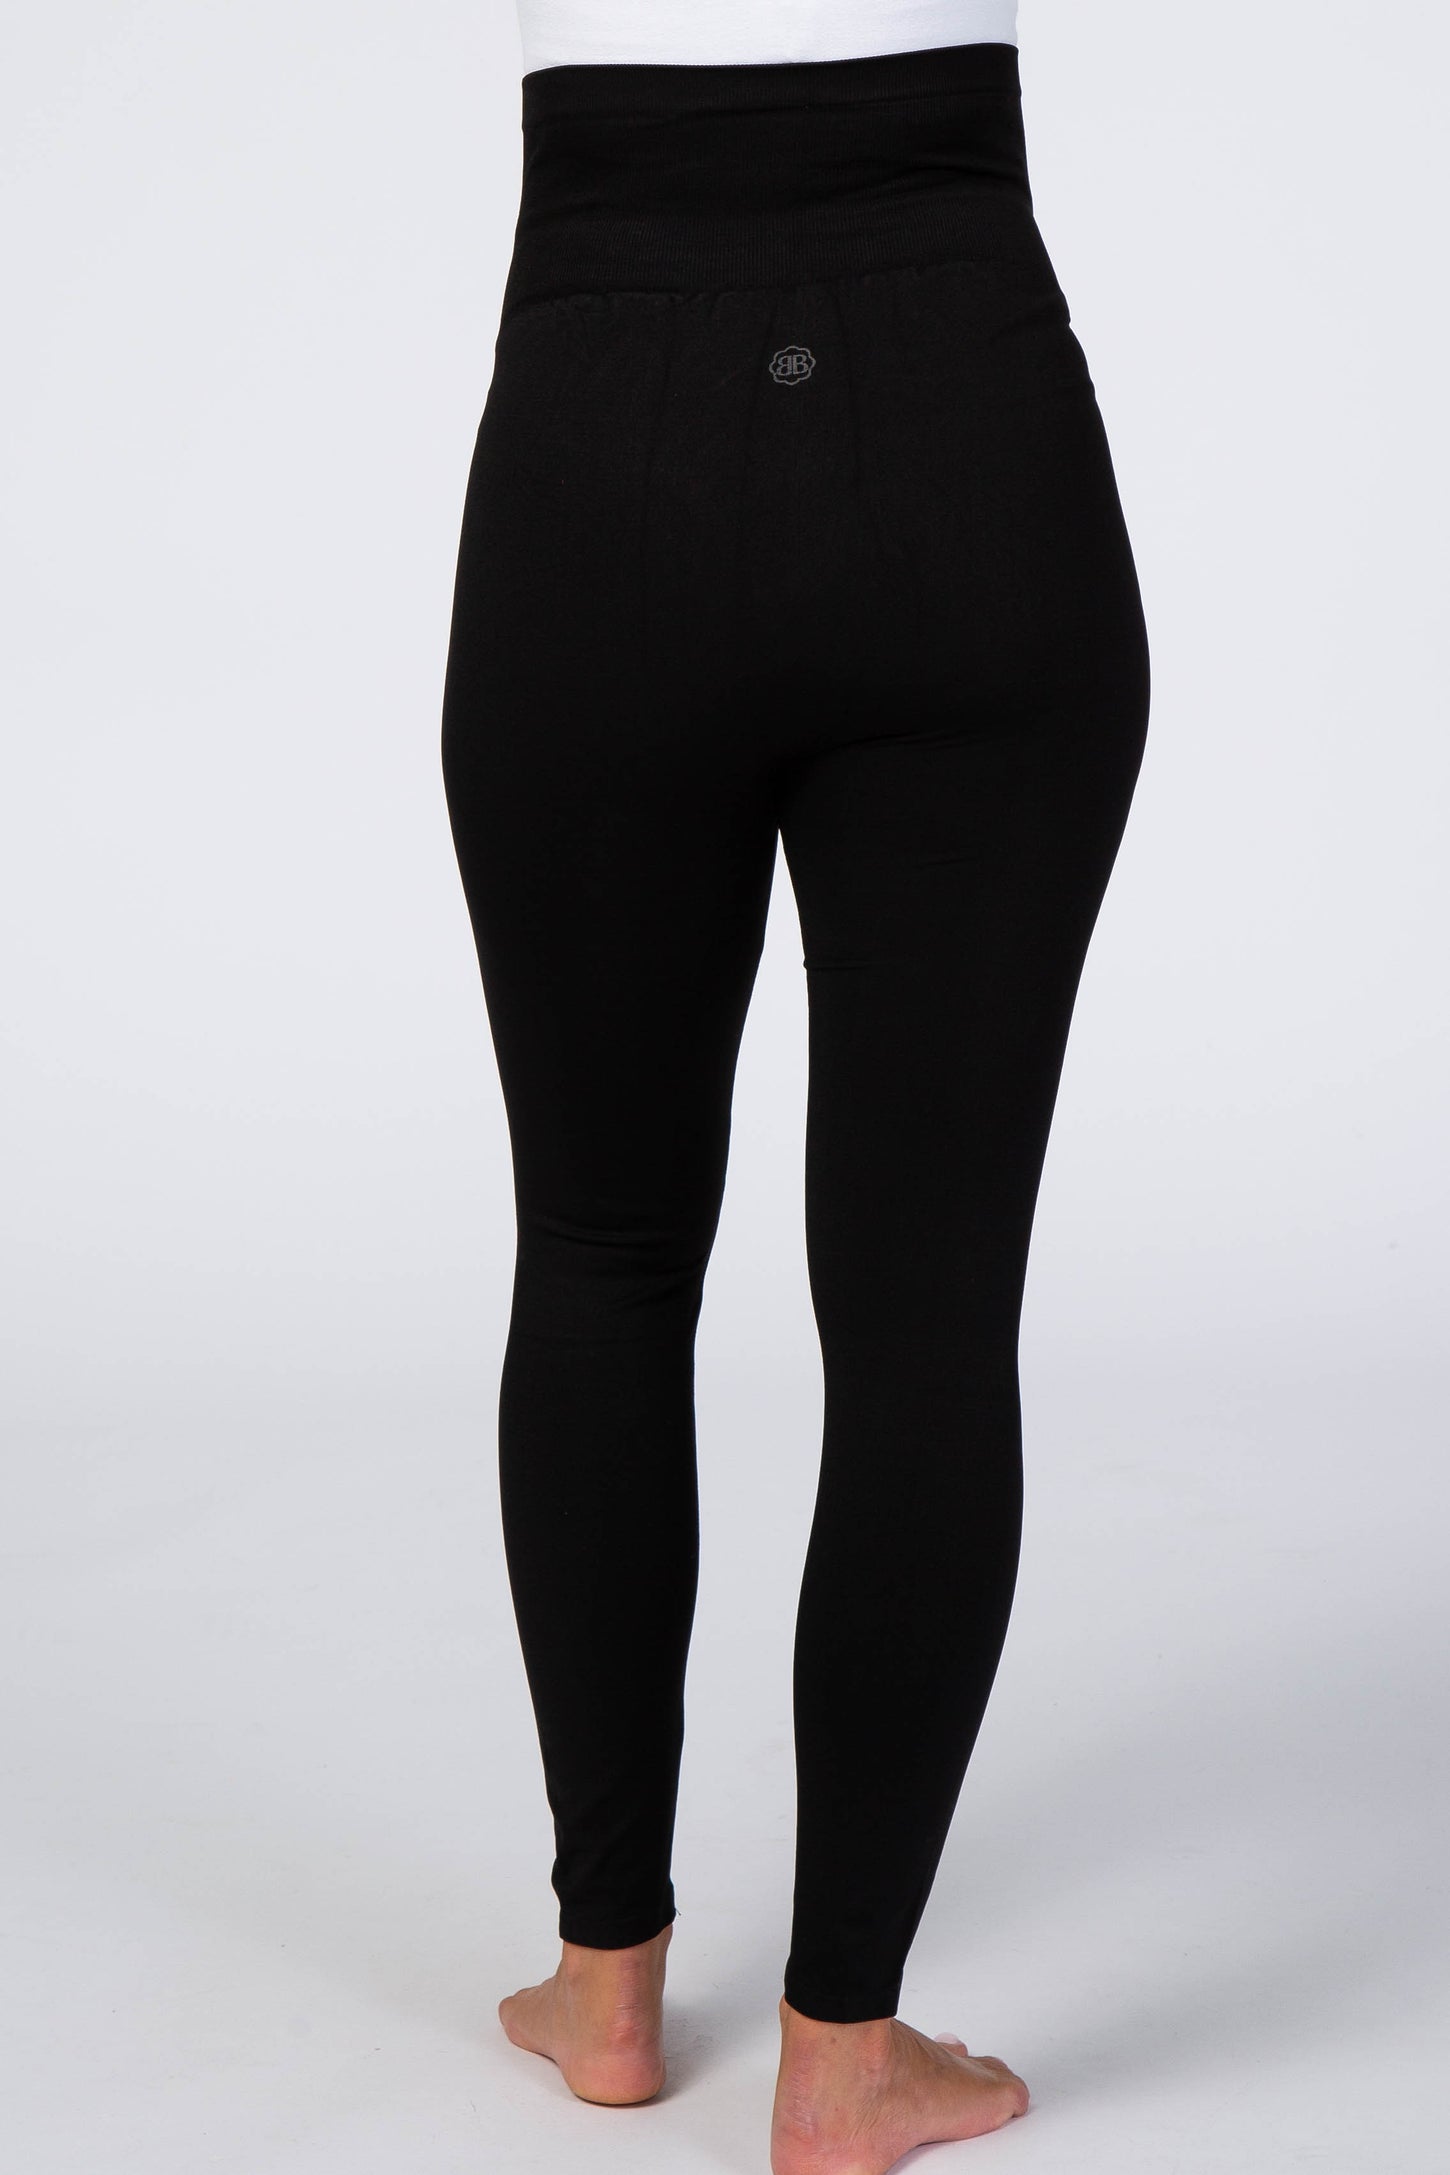 Maternity Bump Support Leggings - Buy 3 Save 30% – Belly Bandit